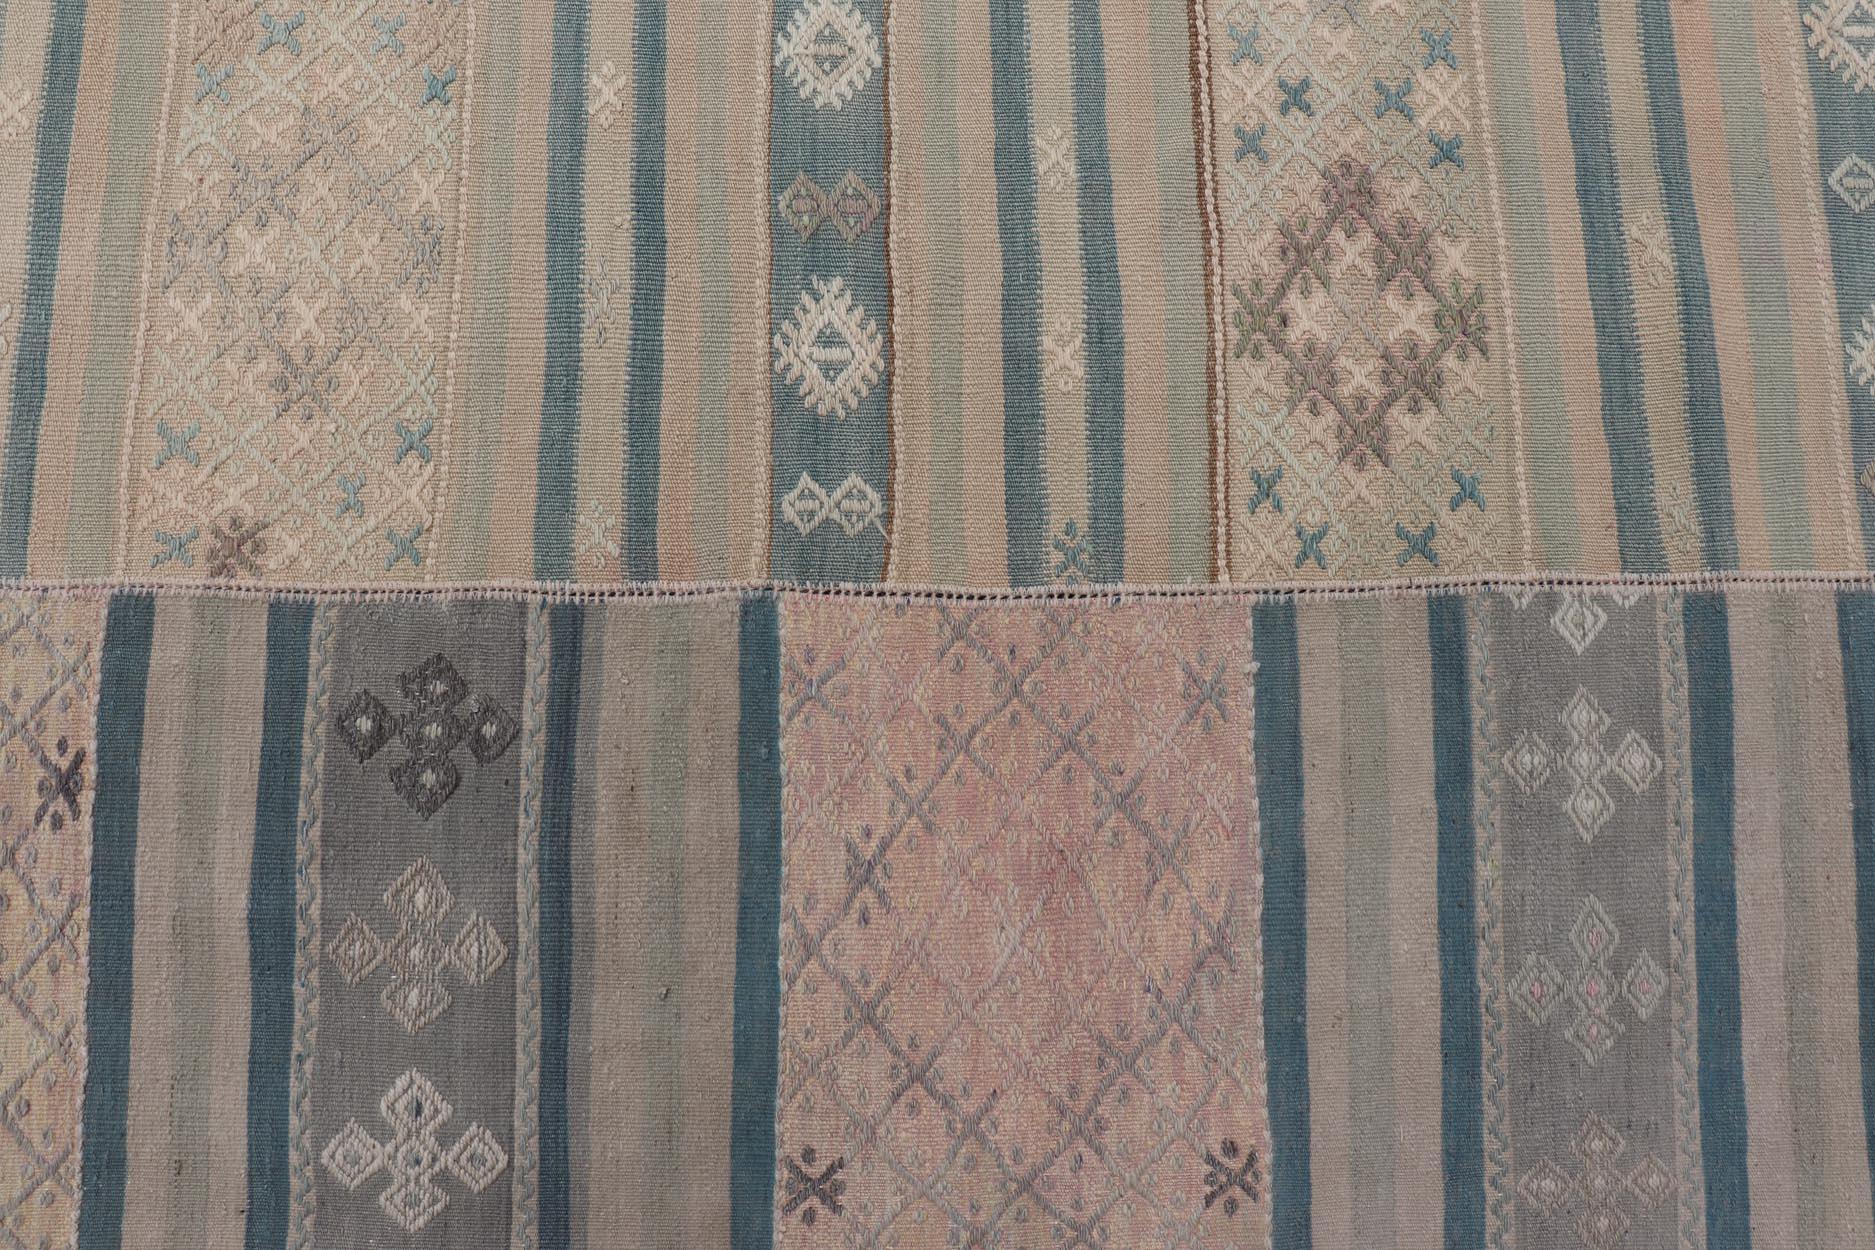 Large Vintage Paneled Kilim Flat-Weave in Blue, Pink, Taupe, Gray, Light Brown In Good Condition For Sale In Atlanta, GA